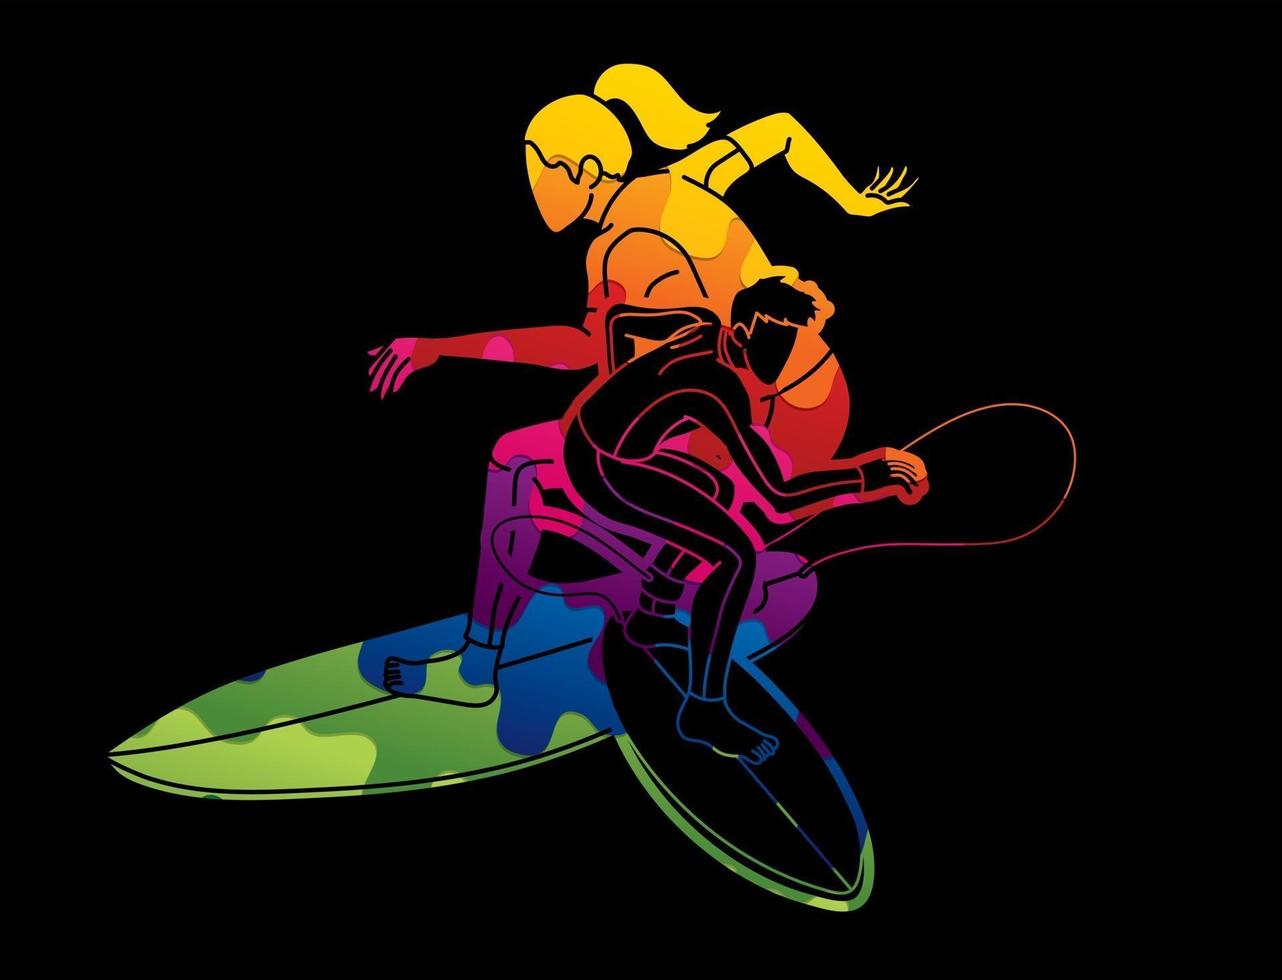 Graffiti Group of Surfing Sport Male and Female Players vector